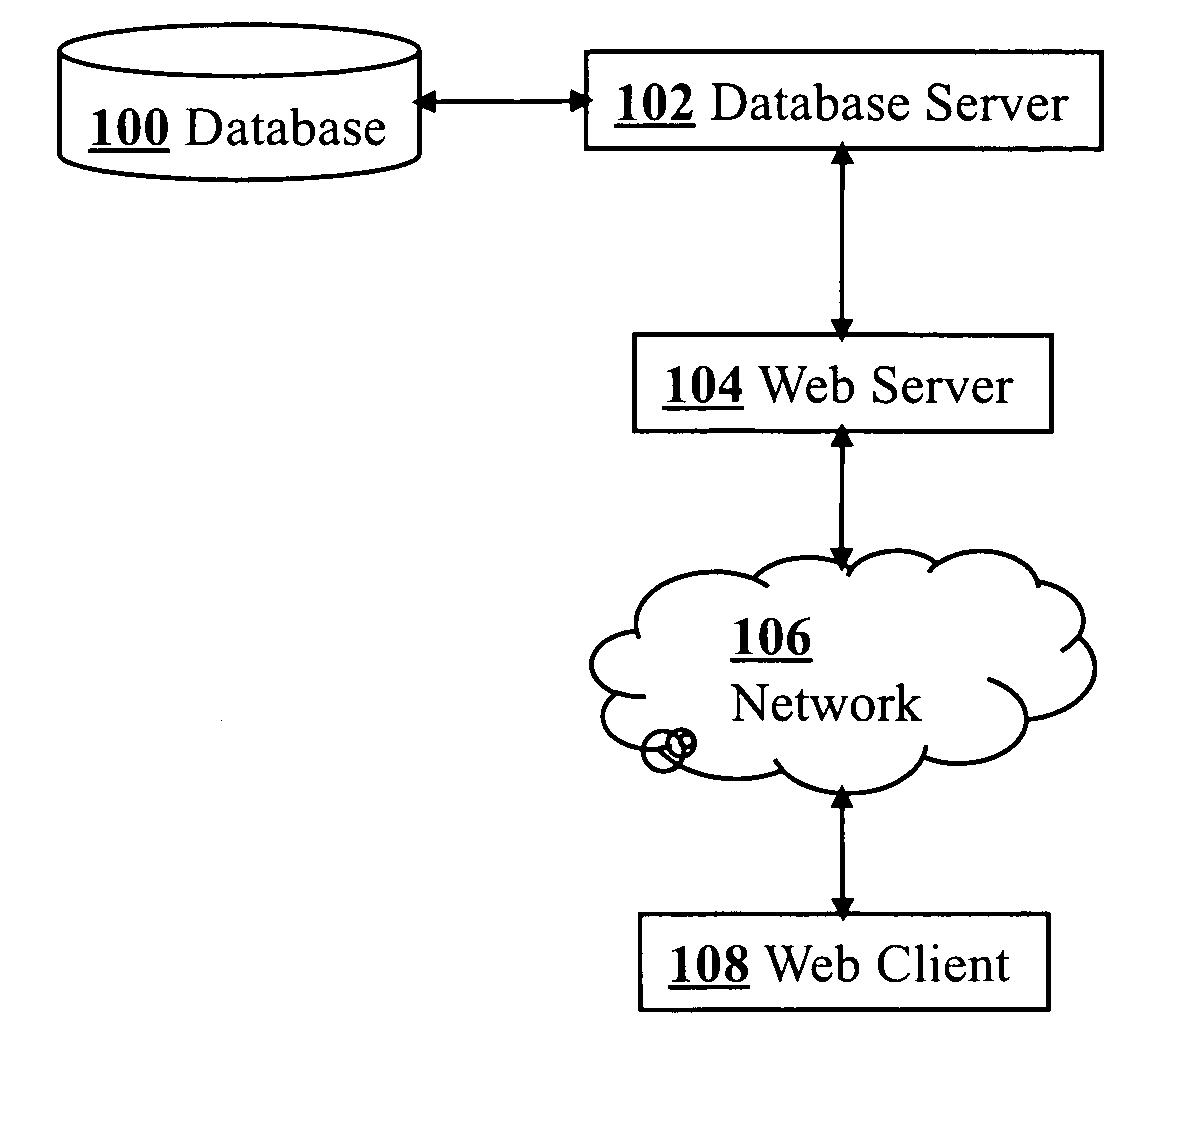 Display and search interface for product database